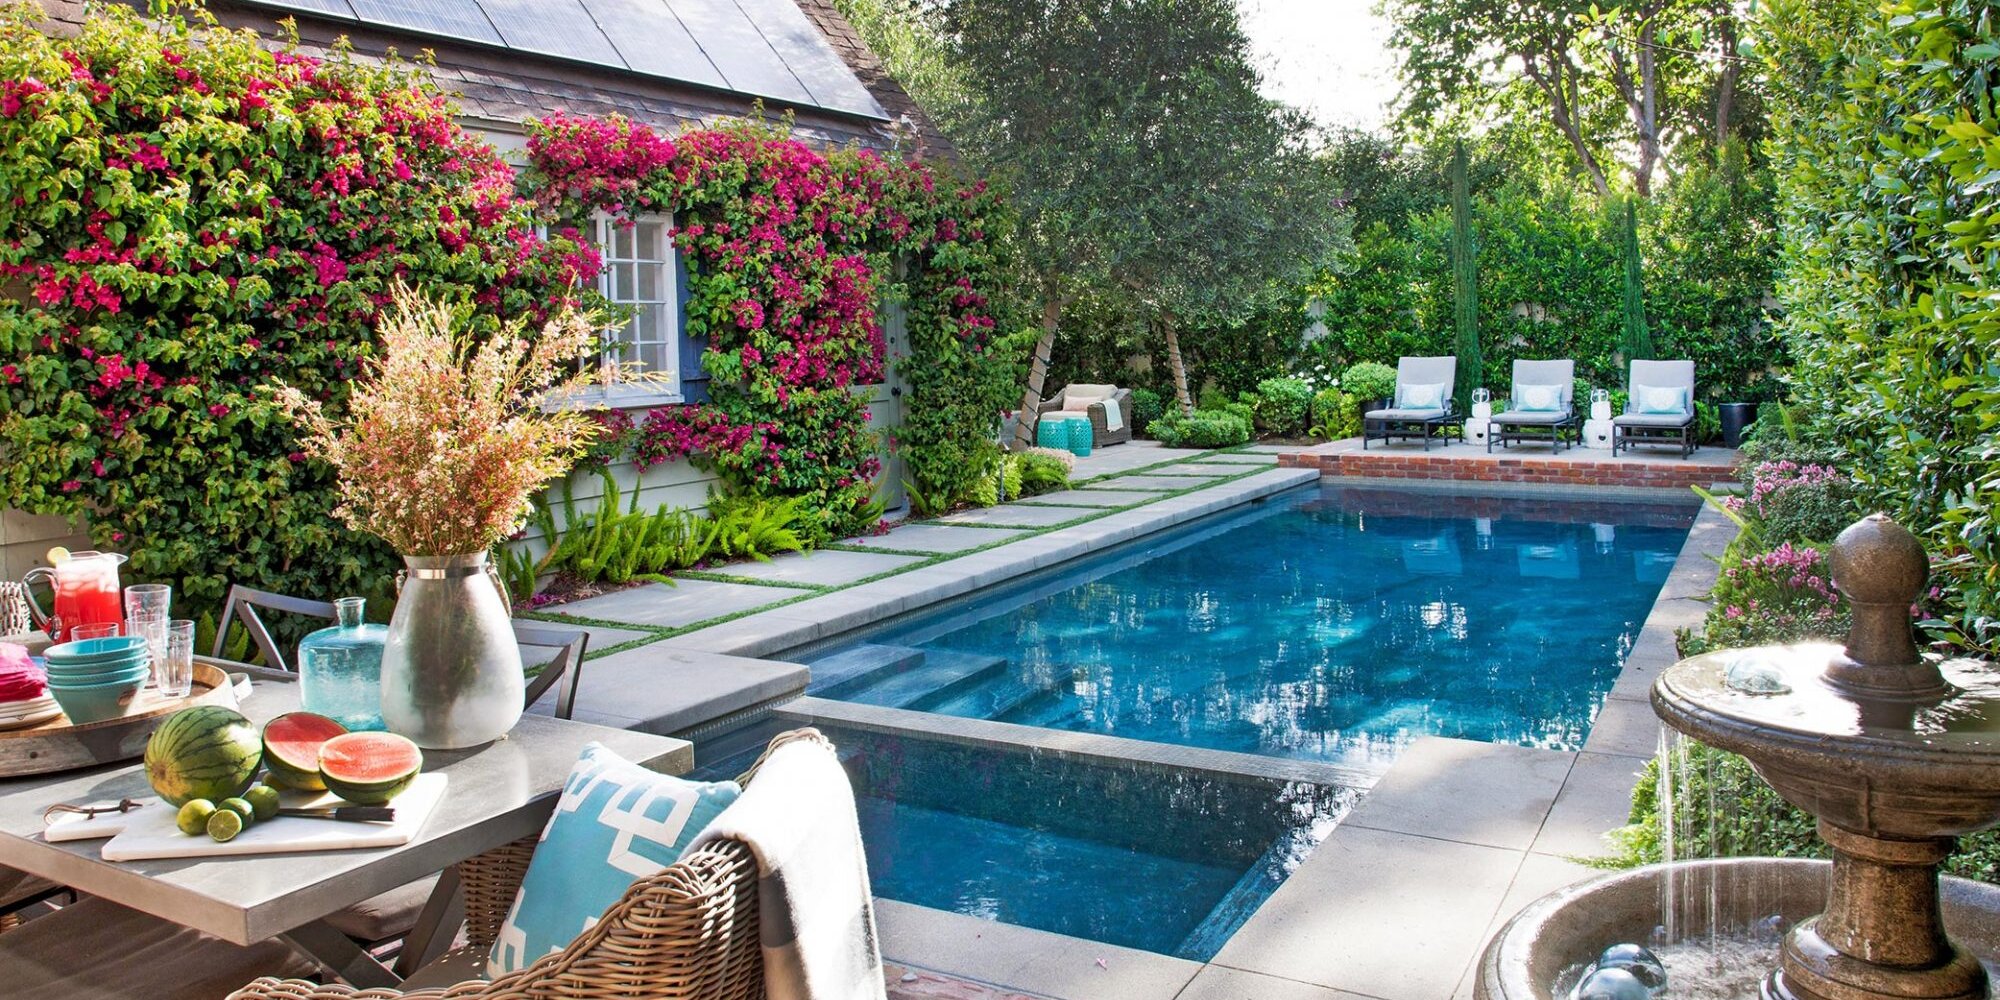 8 Crucial Planning Tips to Know Before You Build a Pool